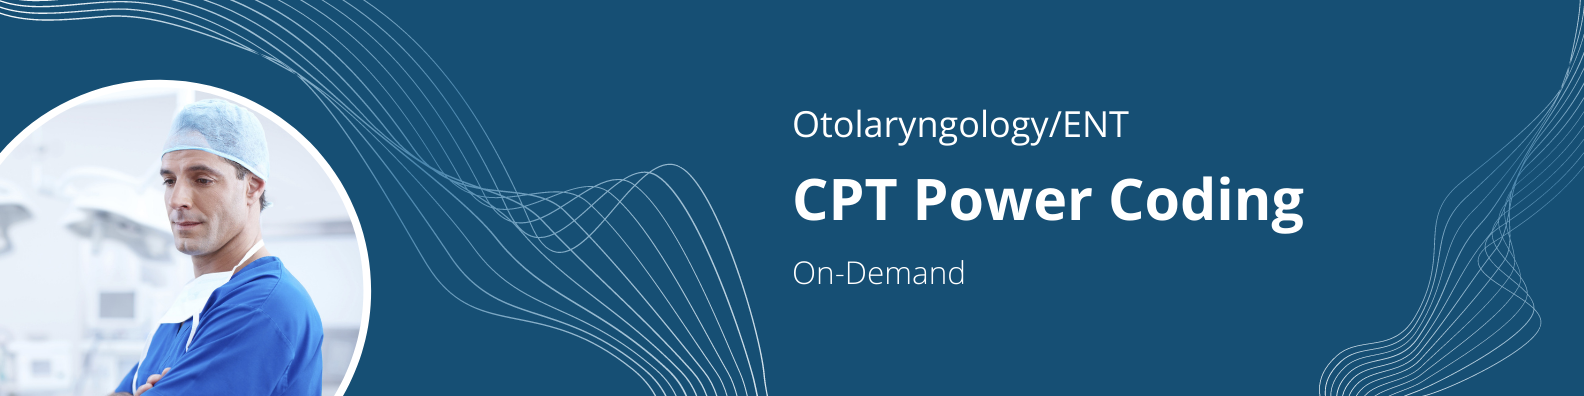 On-Demand - CPT Power Coding